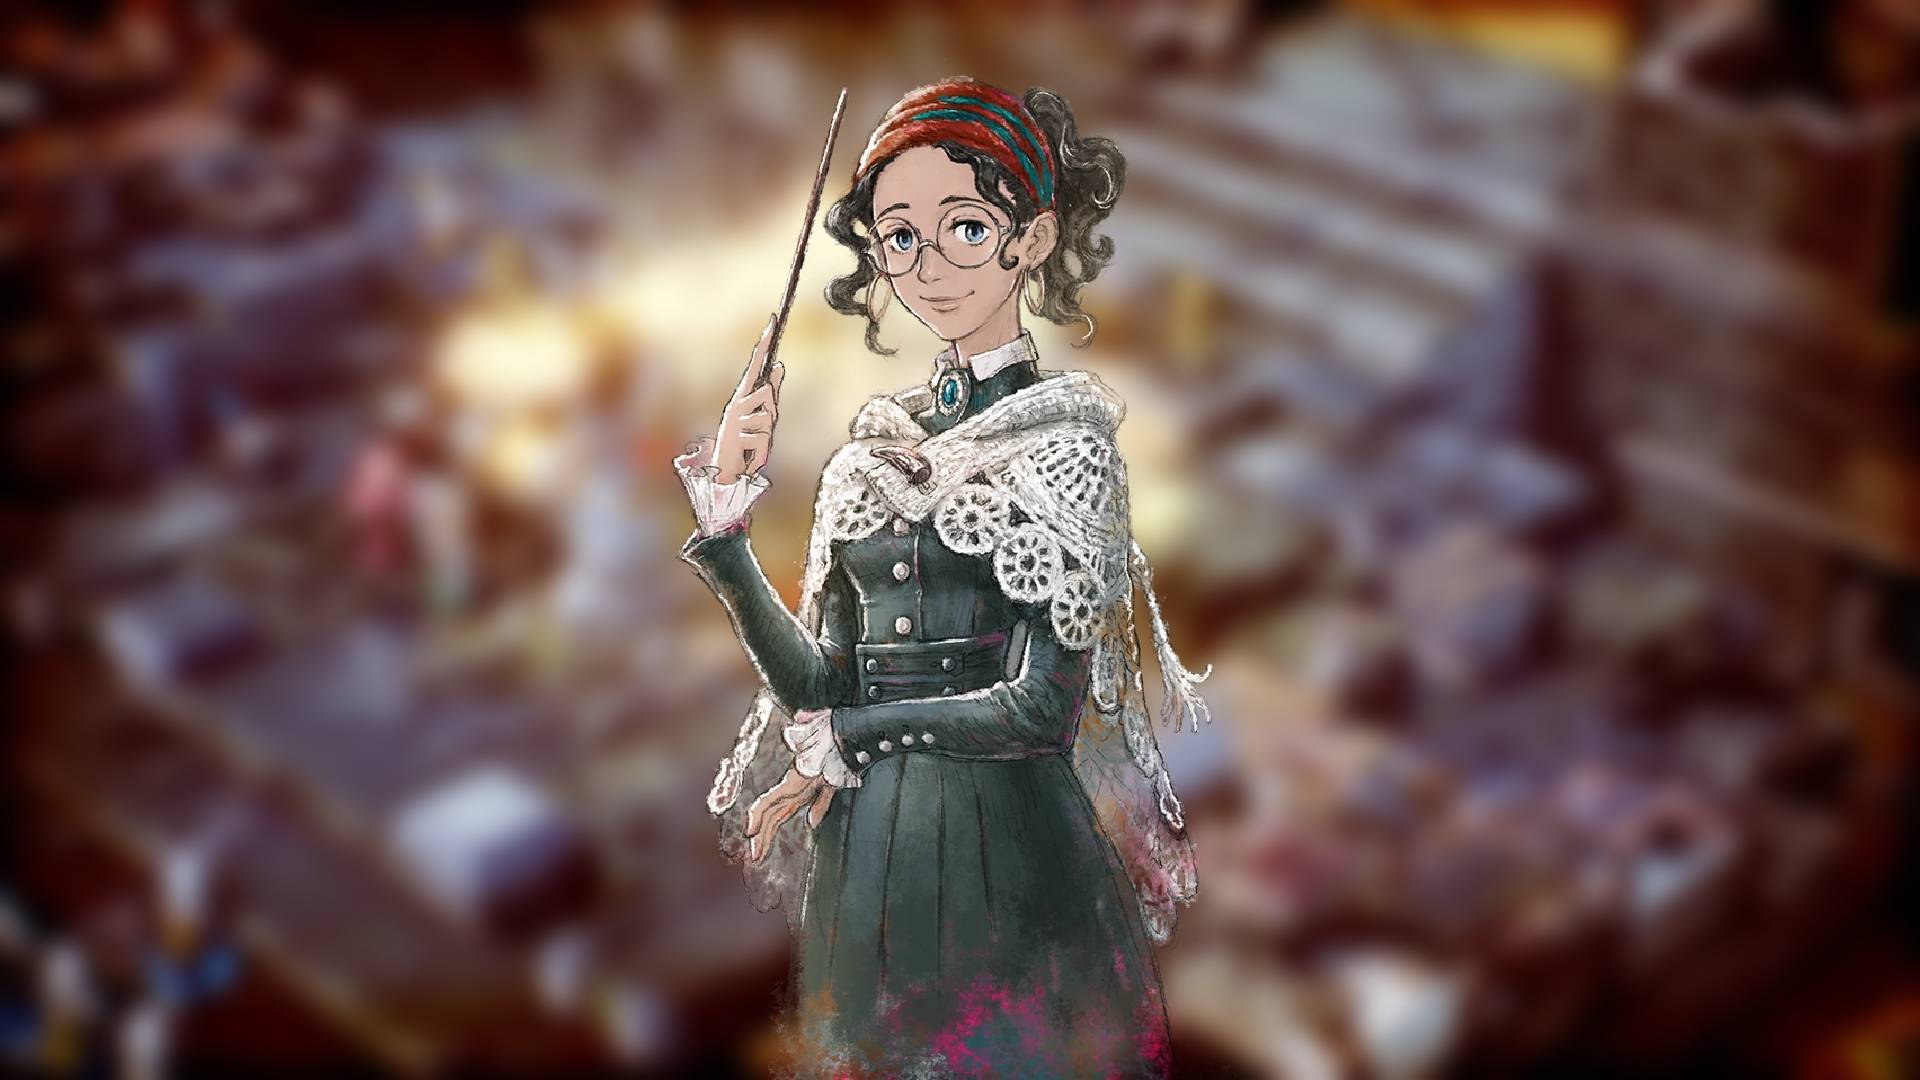 Triangle Strategy characters: Key art for the game Triangle Strategy shows an illustration of a young women with dark hair, glasses, and a wand 